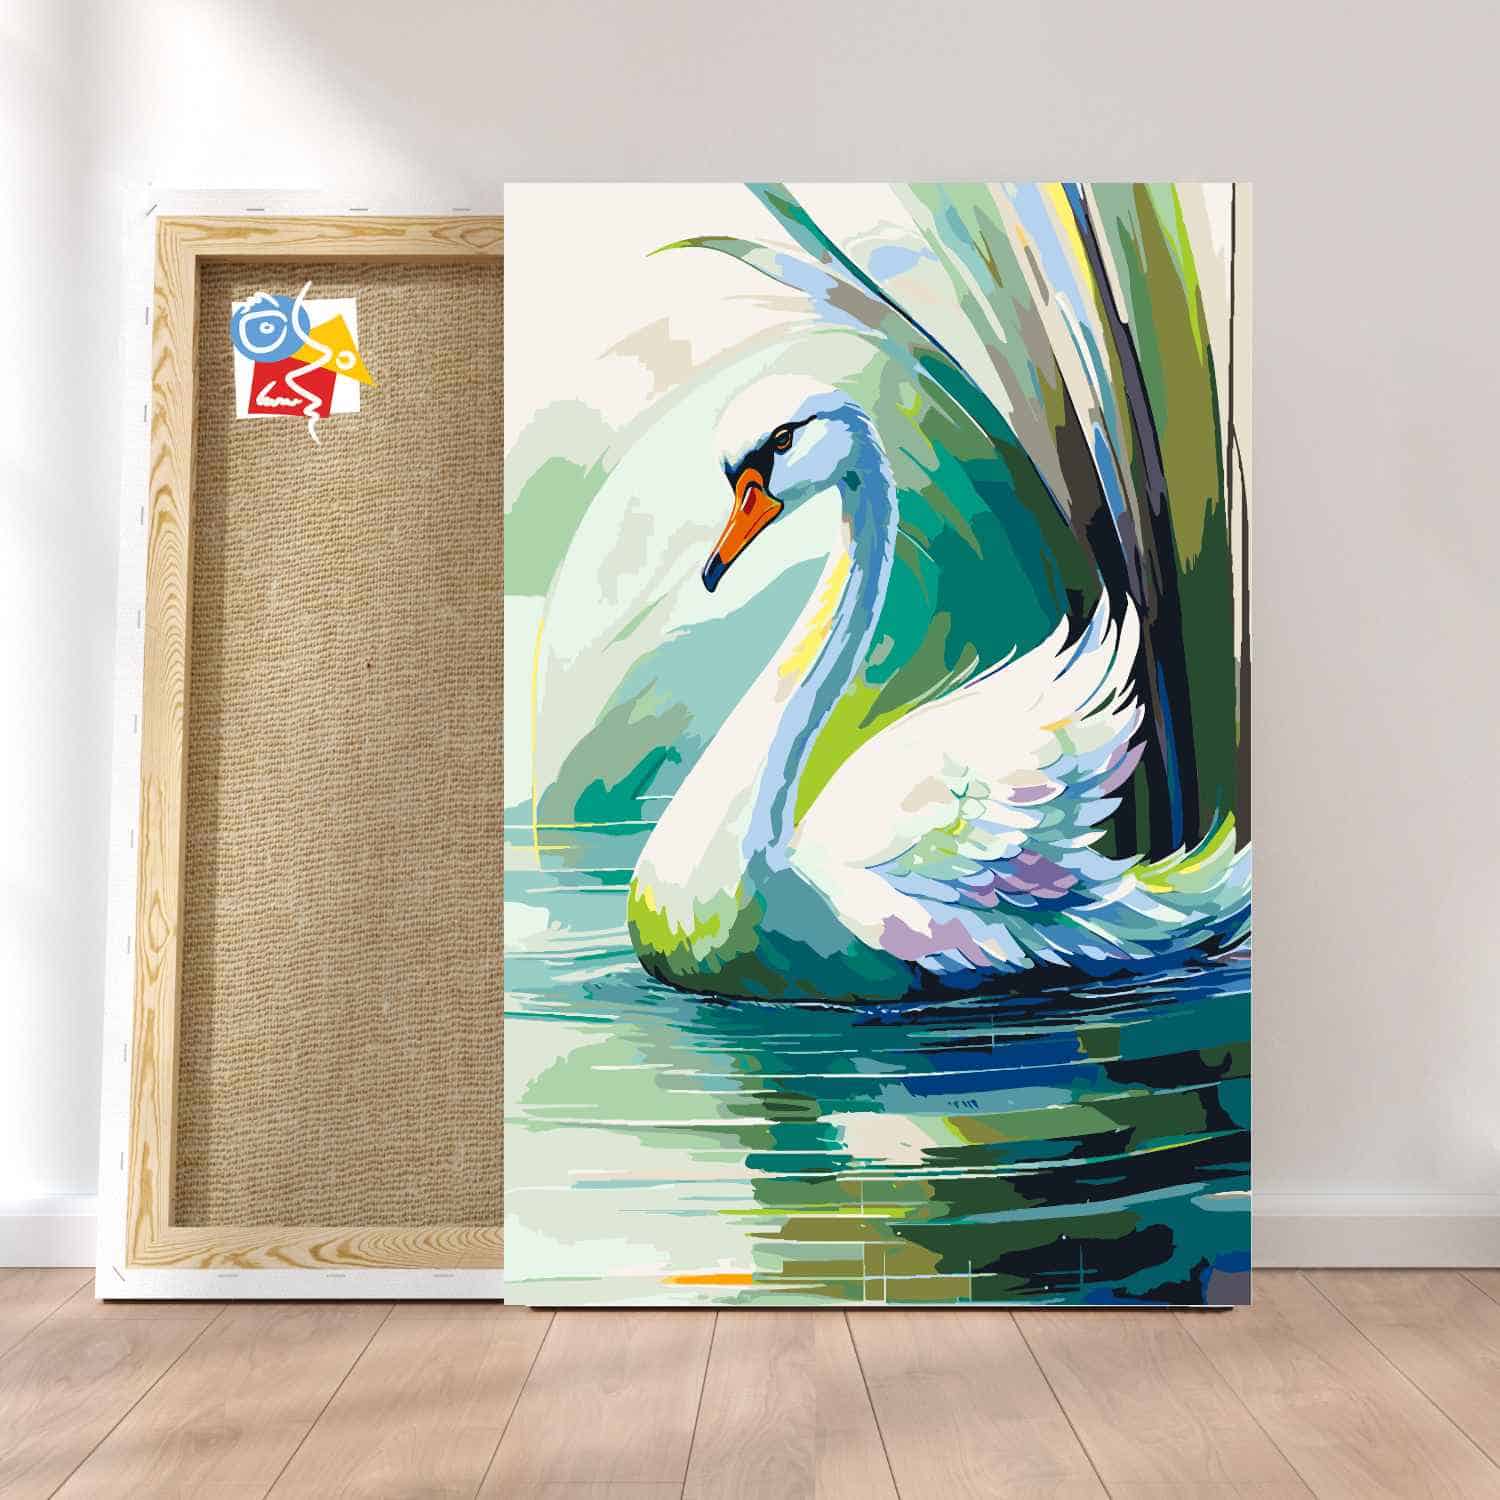 Swan and reeds